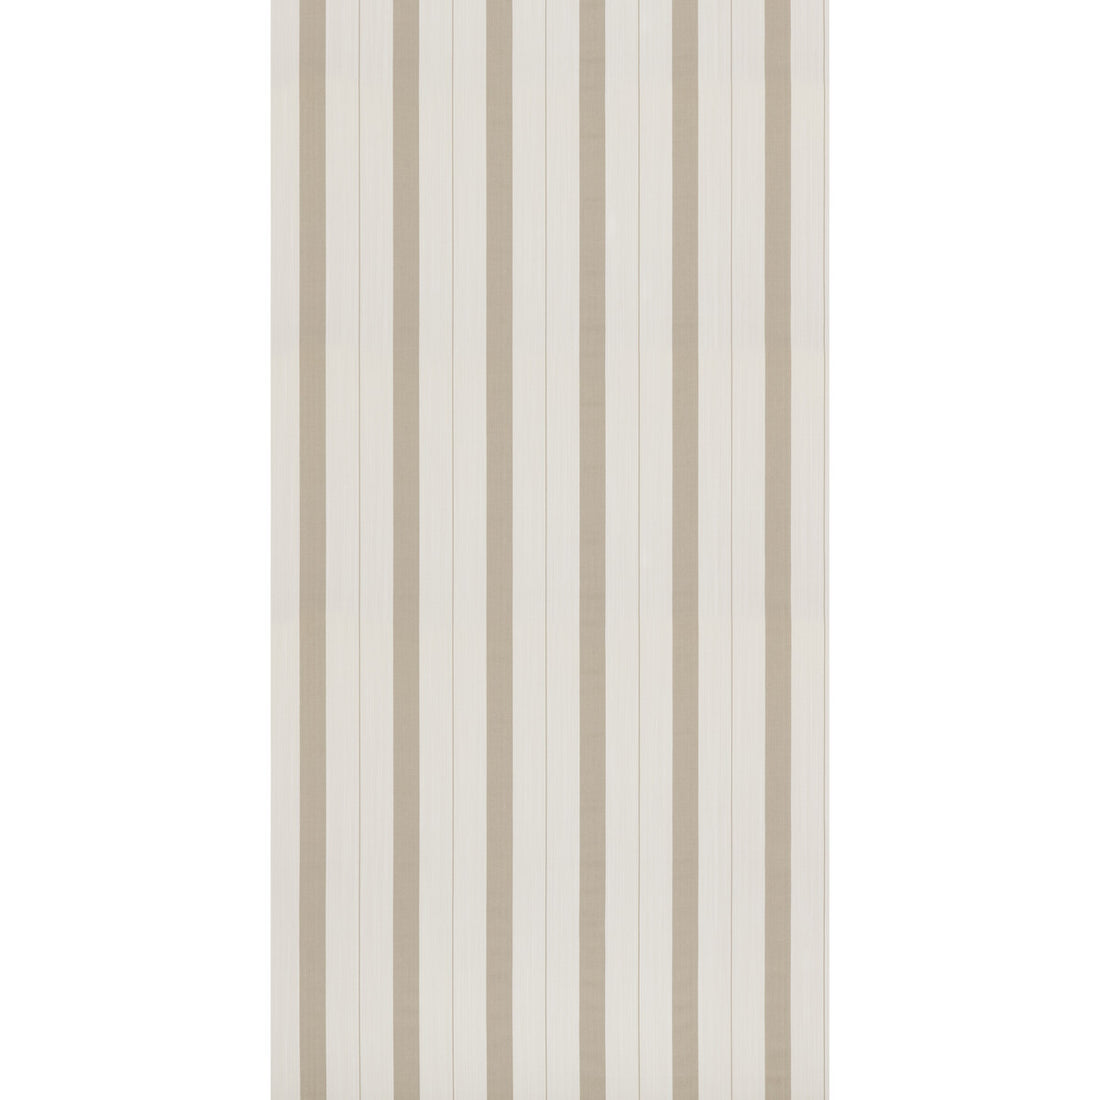 Pamir Stripe fabric in ivory color - pattern ED85341.104.0 - by Threads in the Faraway collection